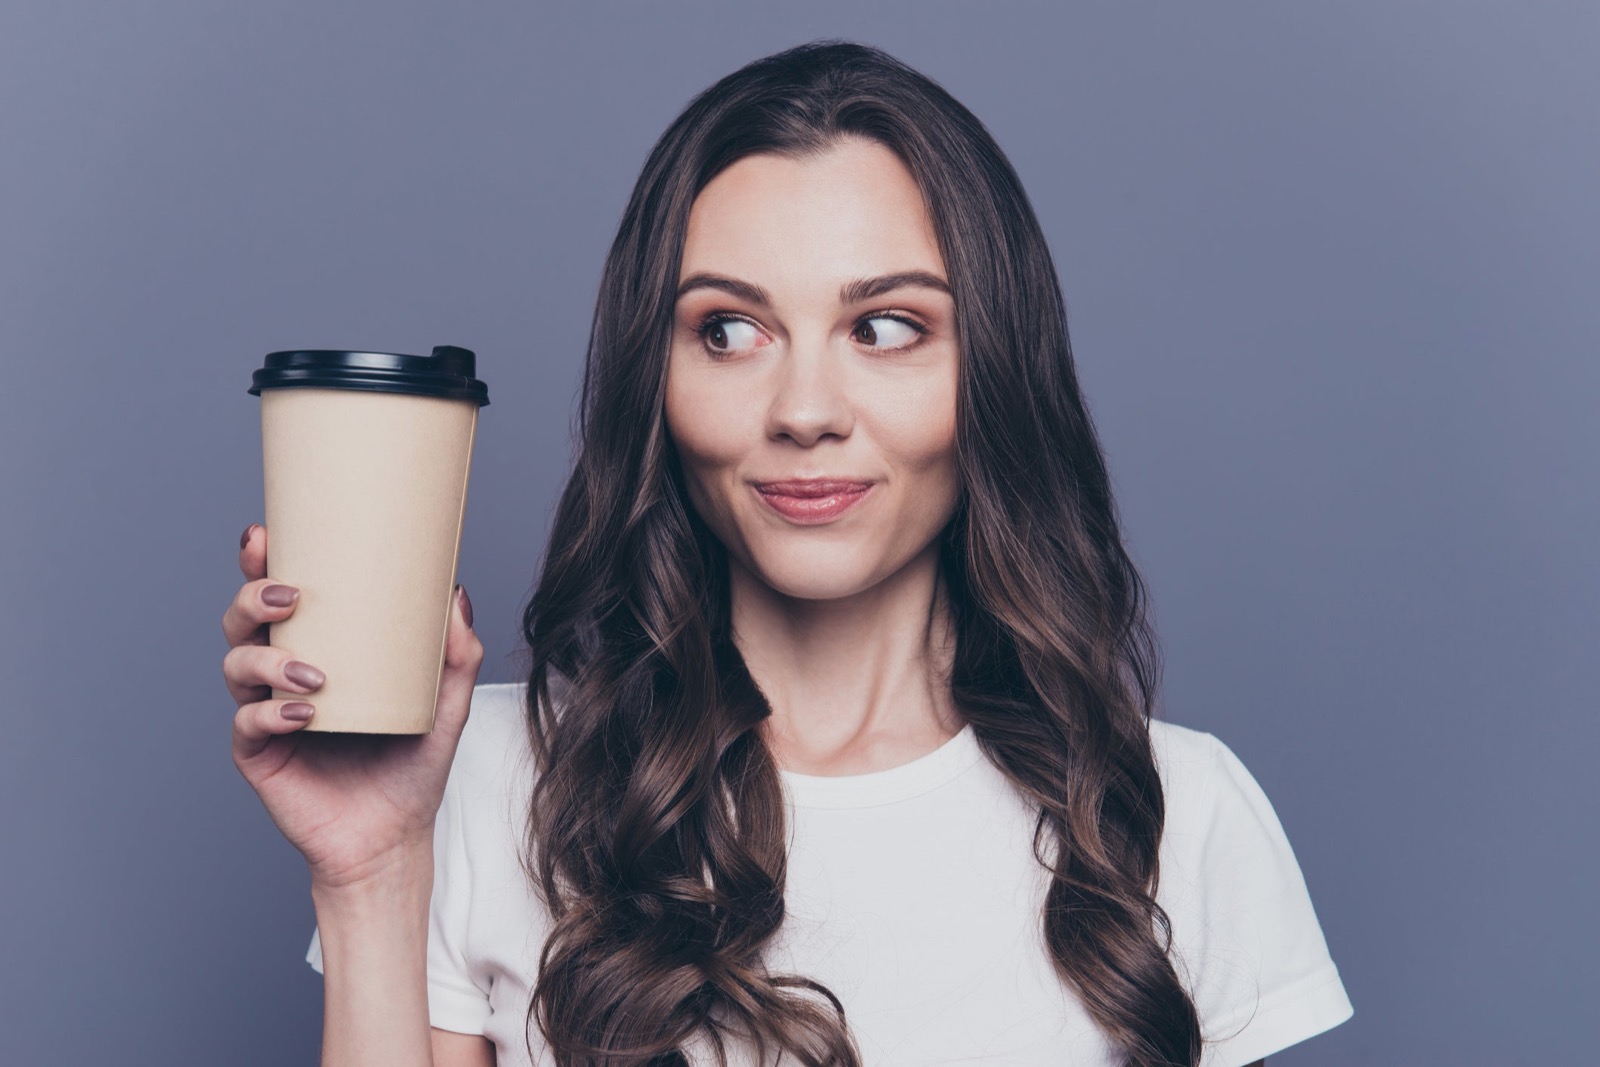 This Food Showdown Quiz Is Scientifically Designed to Determine What Kind of Optimist or Pessimist You Are Woman Drinking Coffee Cup